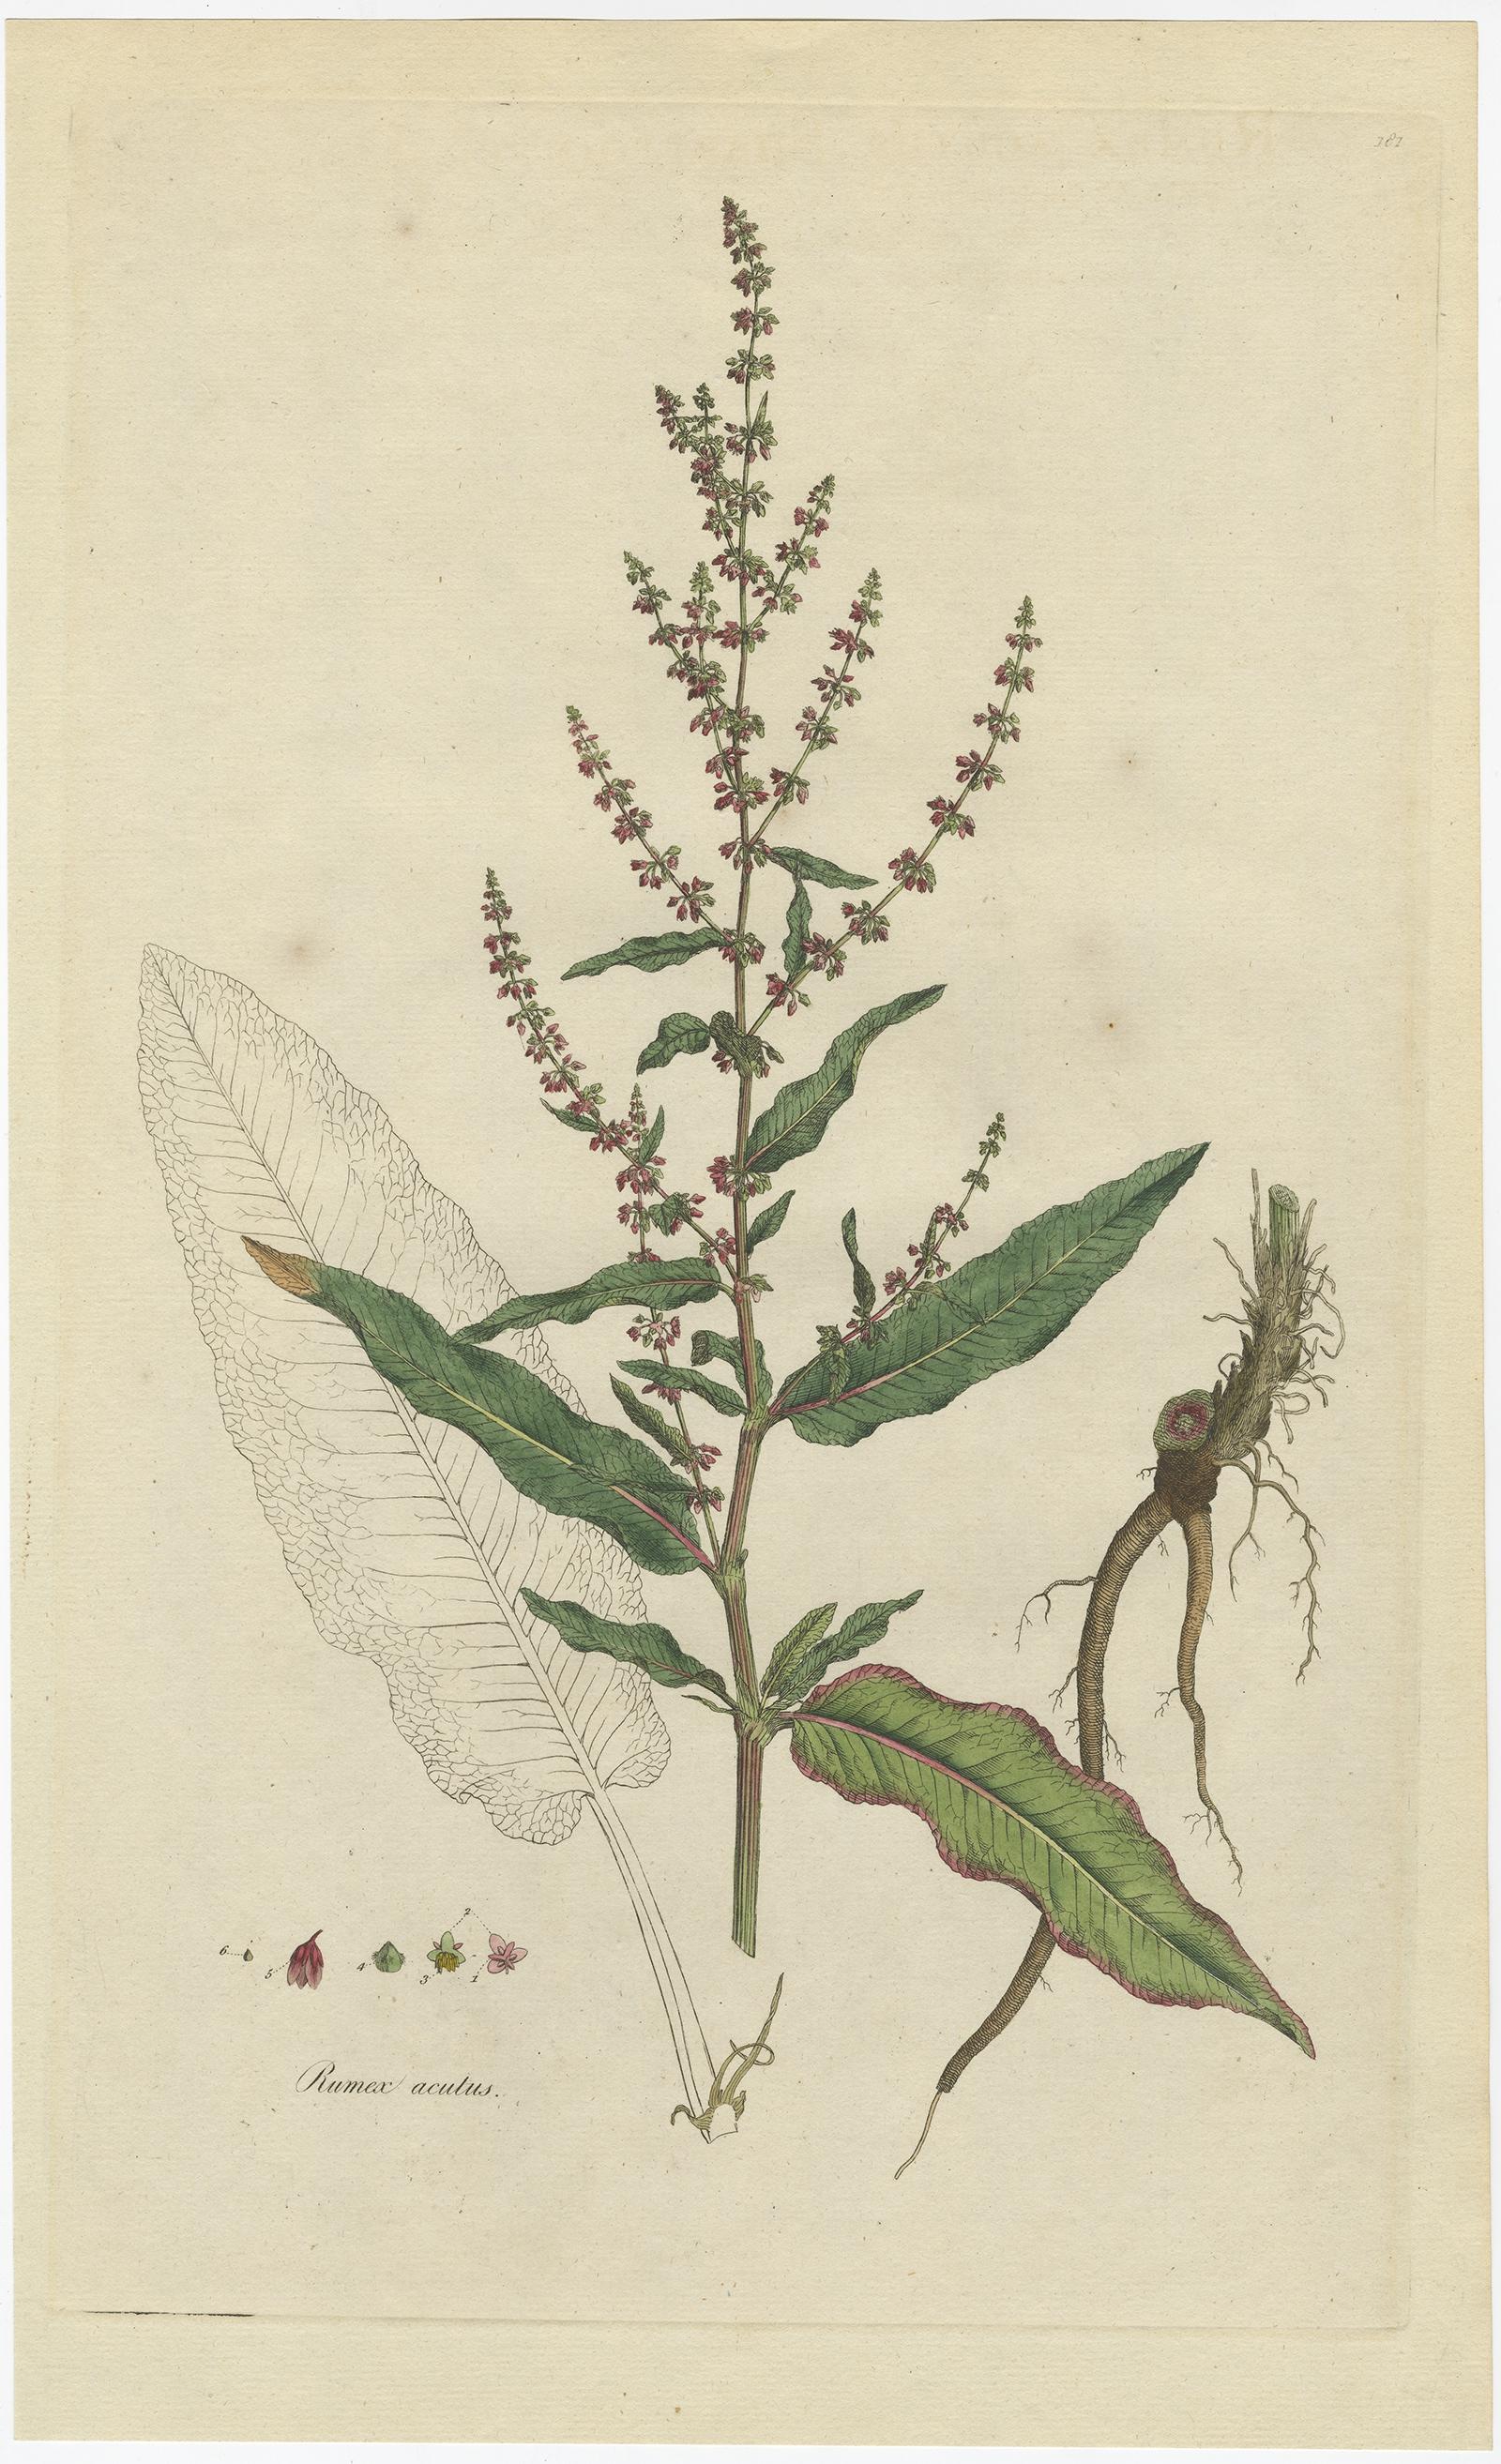 Antique print titled ‘Rumex Acutus’. 

The Rumex Acutus (or Sharp-Pointed Dock) is a common plant like the Common Dock, but handsomer, and distinguished by its sharp-pointed leaves being narrower and longer. It grows about 3 feet high, having